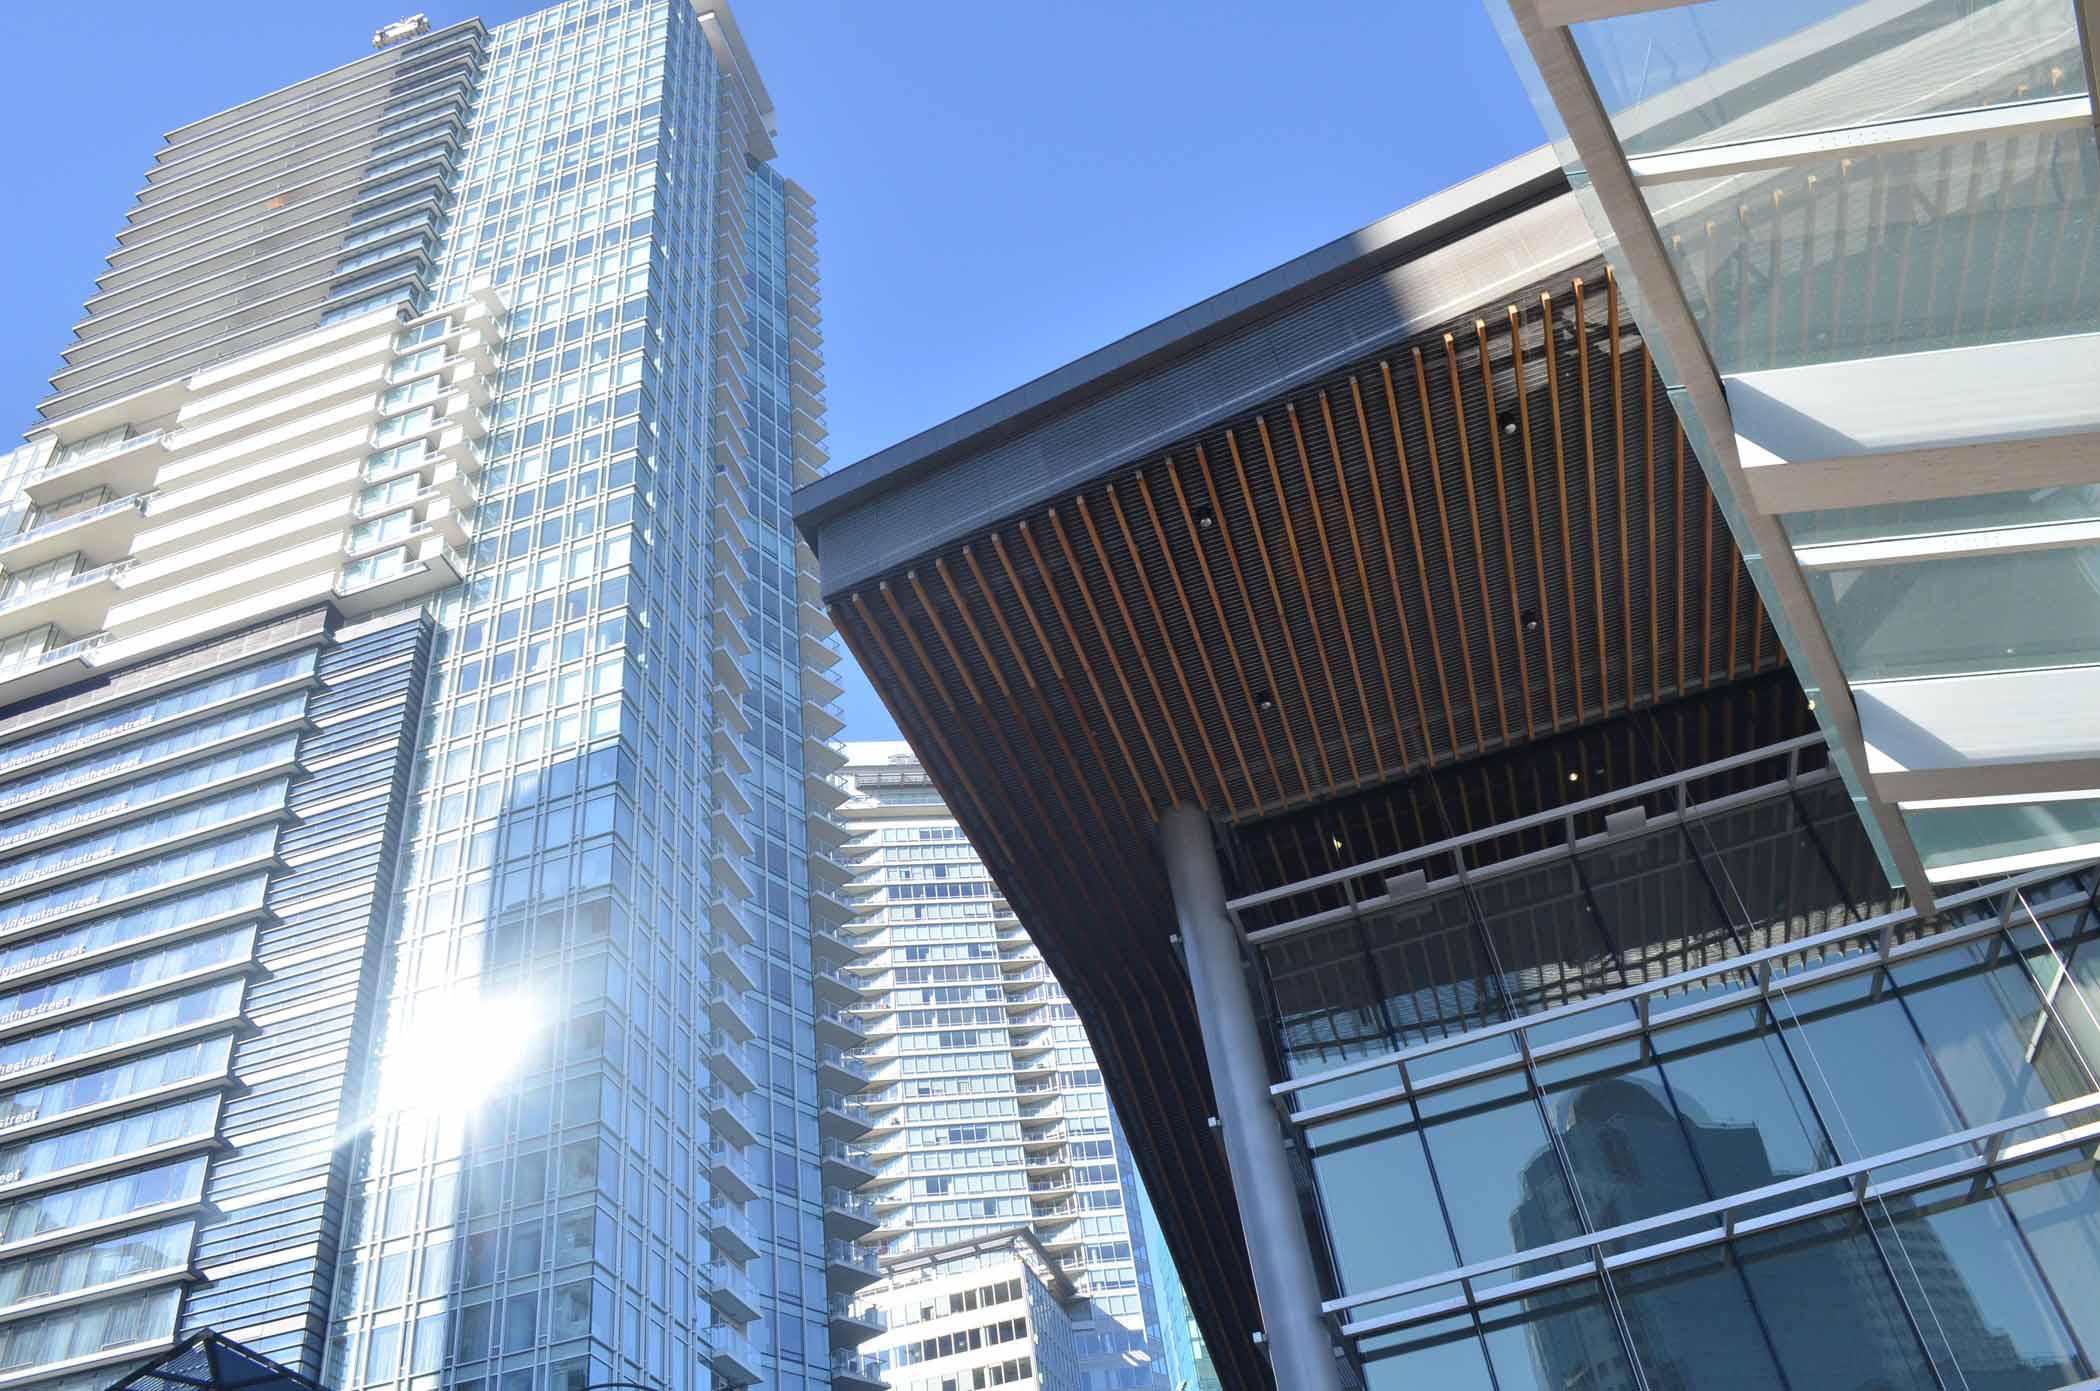 Vancouver Convention Centre and High-Rise